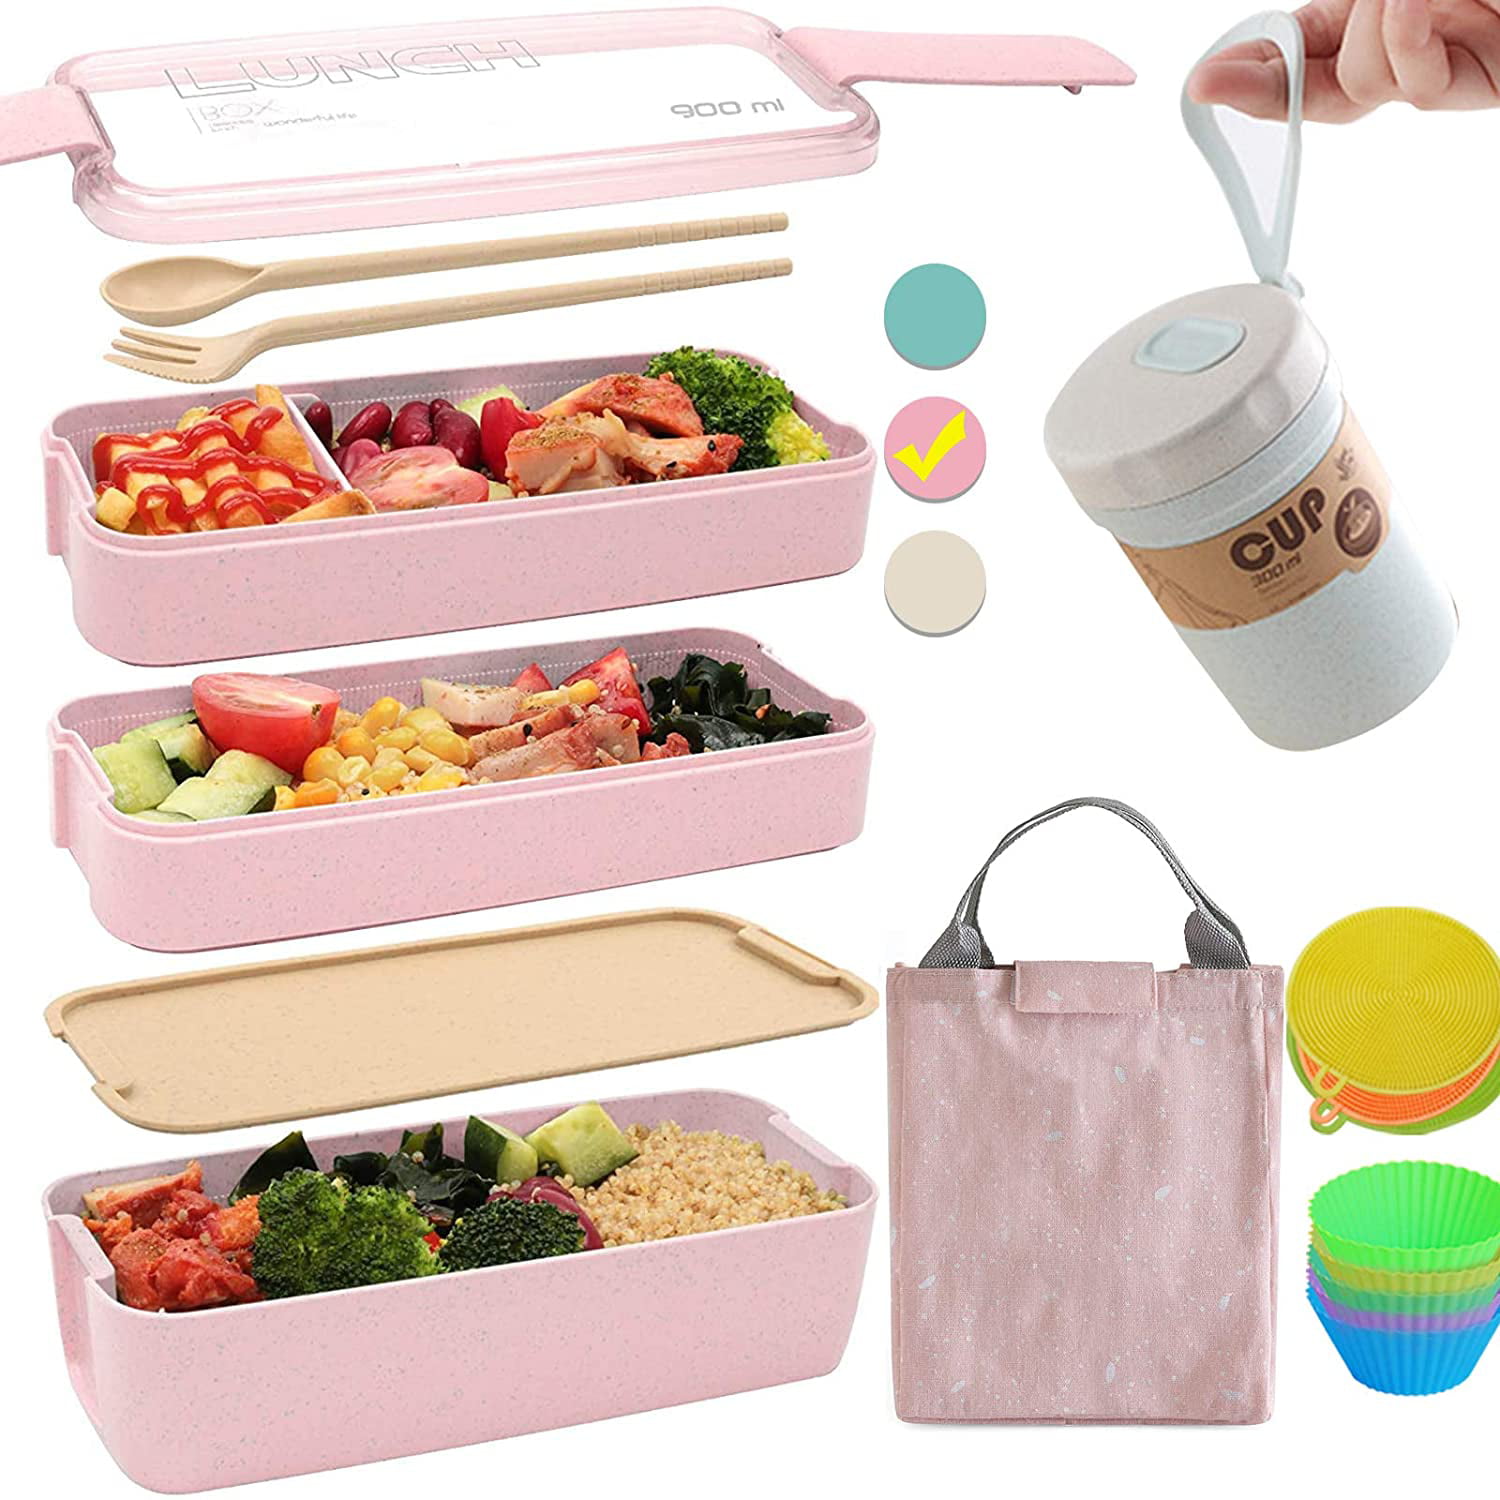 Leakproof Bento Lunch Box with Utensils Meal Prep Food Storage Container New BY 